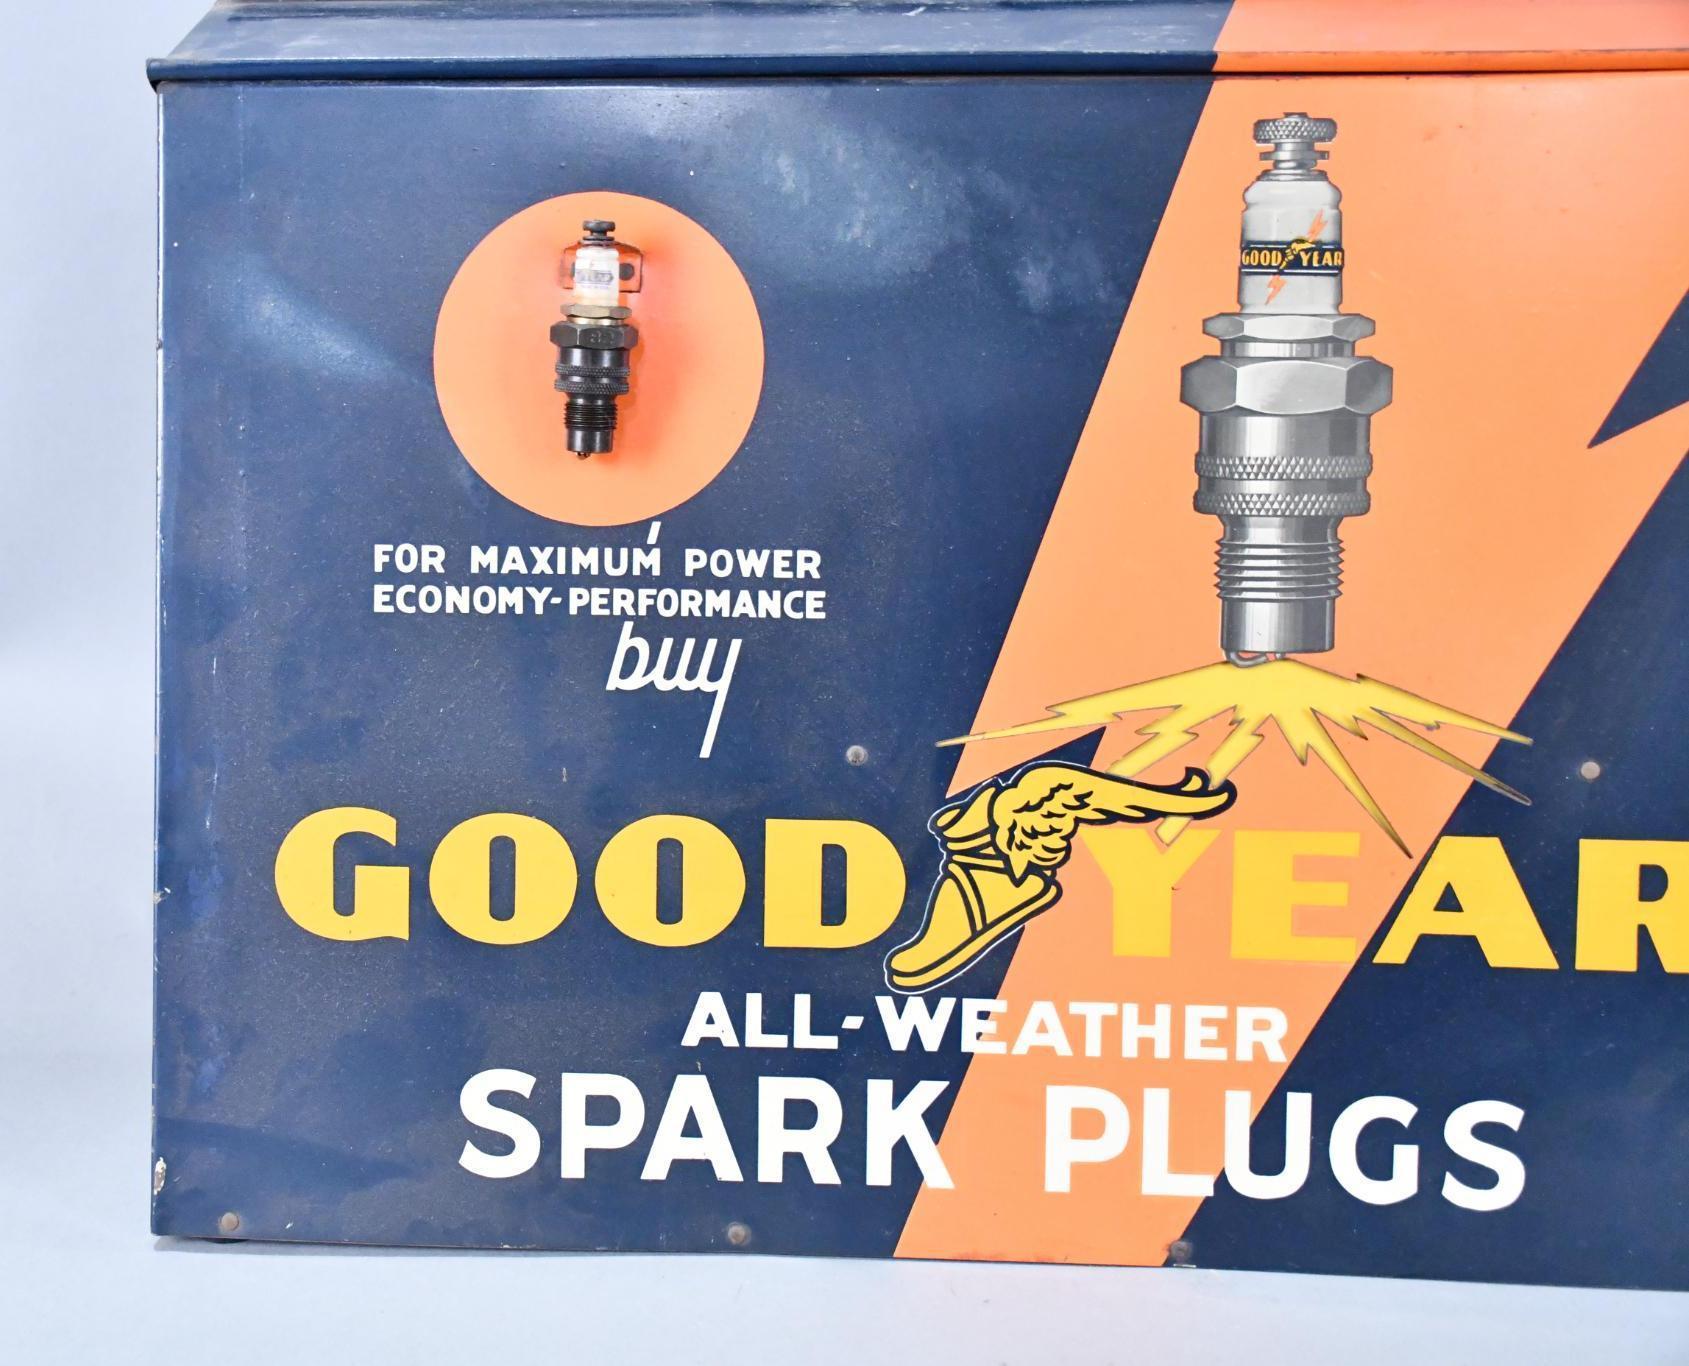 Rare Goodyear All-Weather Spark Plugs Counter-Top Point of Sale Metal Display